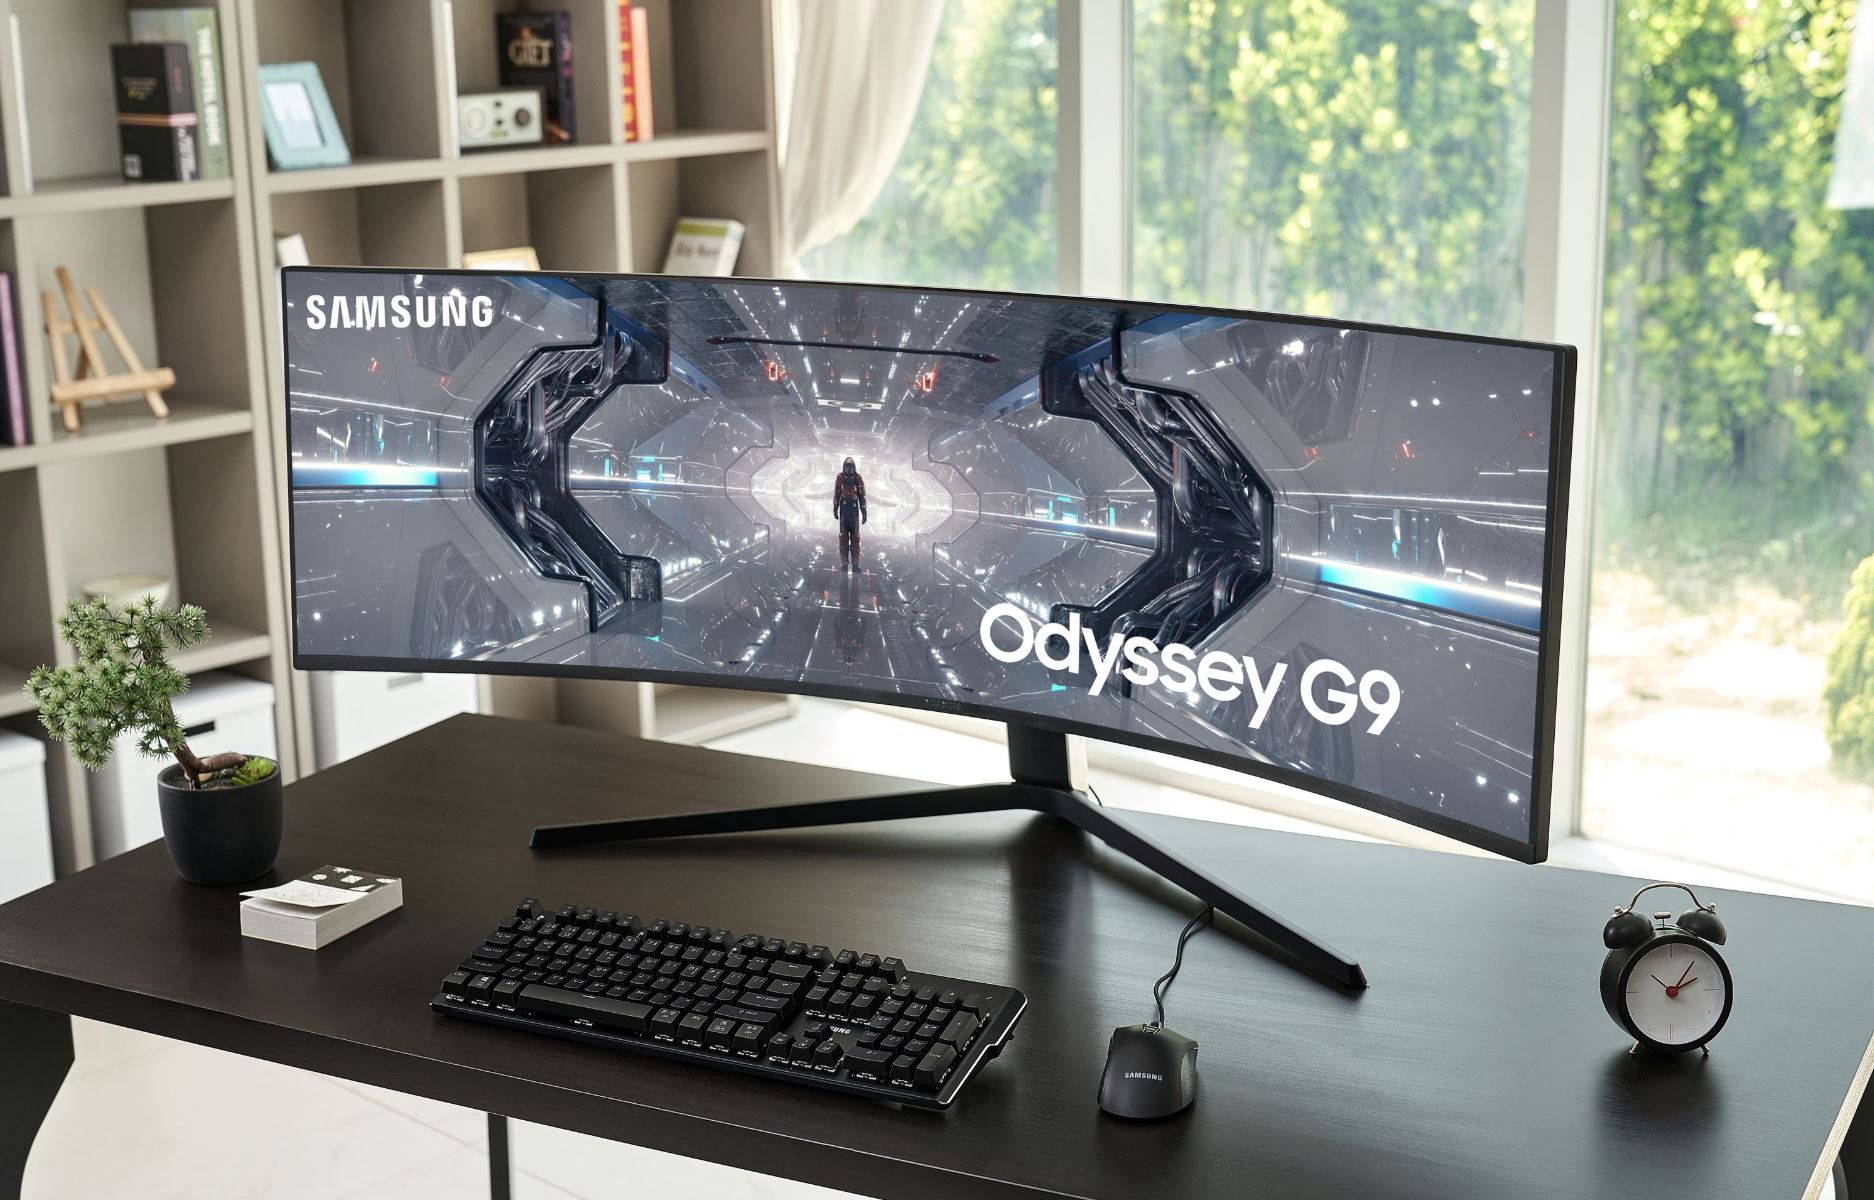 Larger picture odyssey monitor